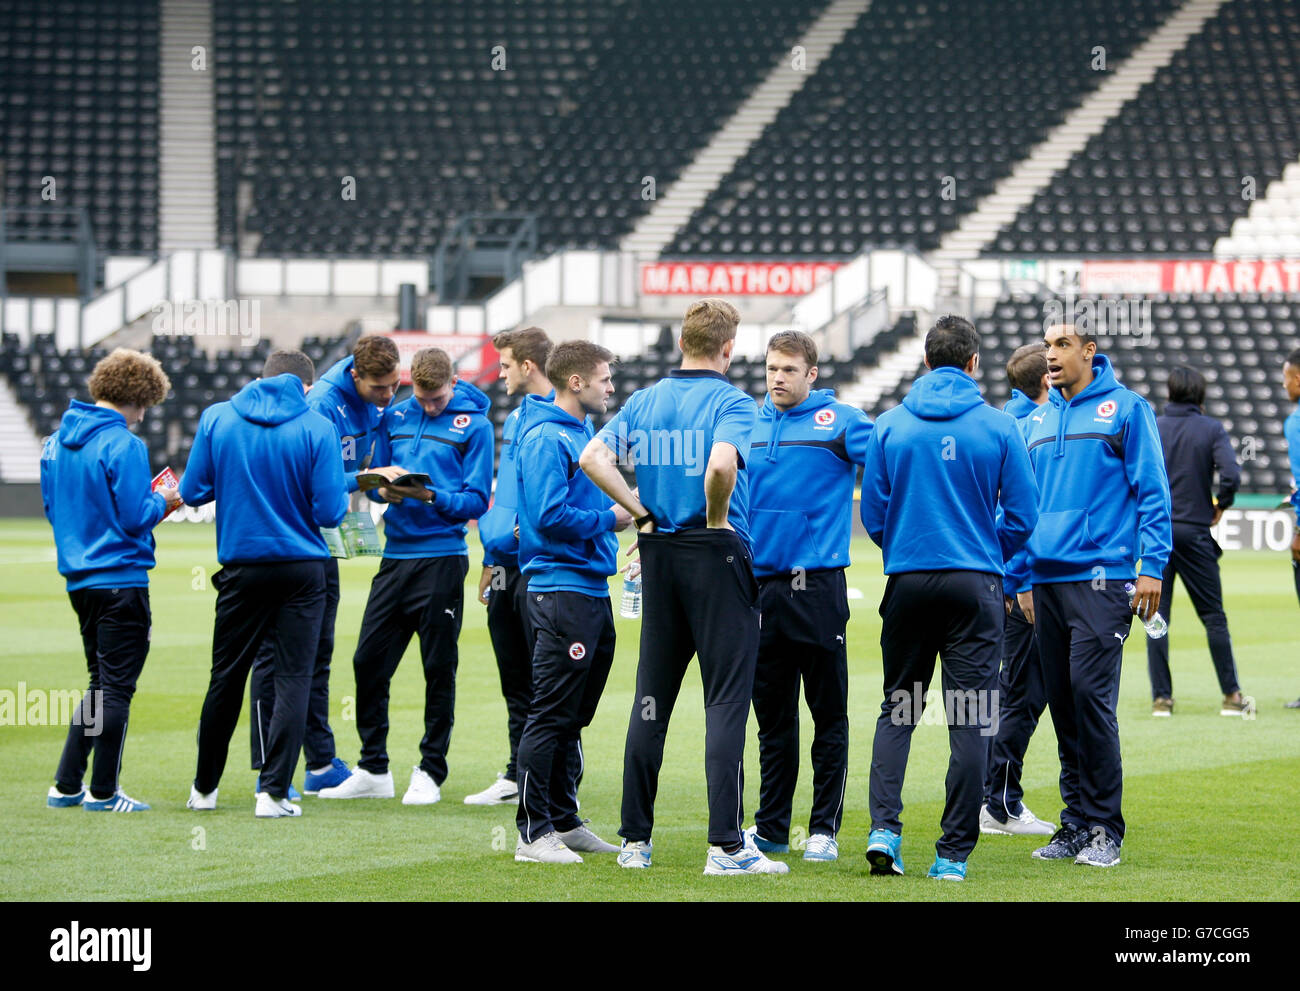 Soccer - Capital One Cup -Third Round- Derby County v Reading - iPro Stadium. Reading Players on the pitch before the match Stock Photo